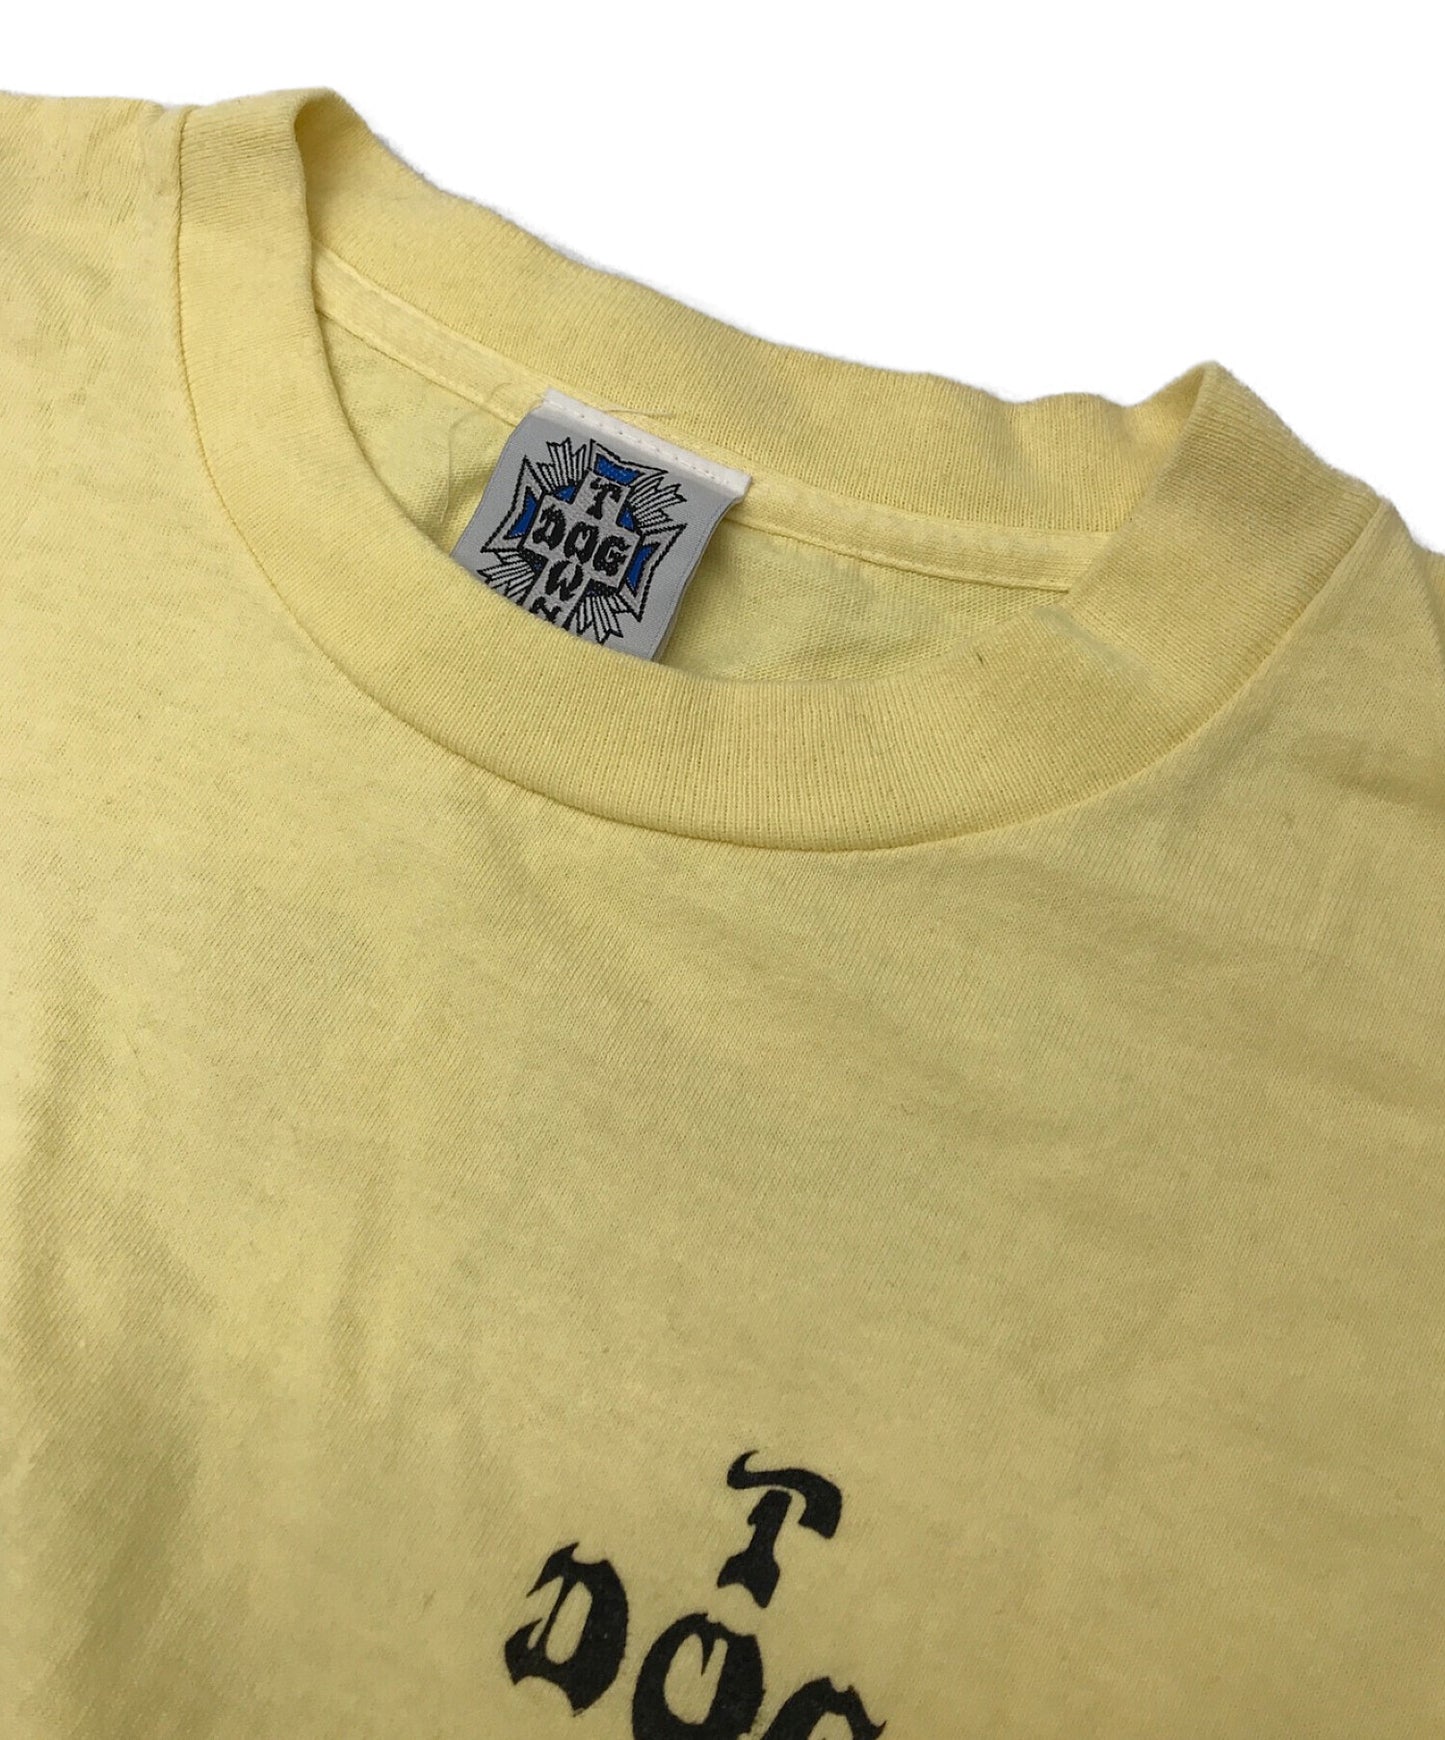 [Pre-owned] DOG TOWN "SHOGO KUBO" SIGNATURE Tee